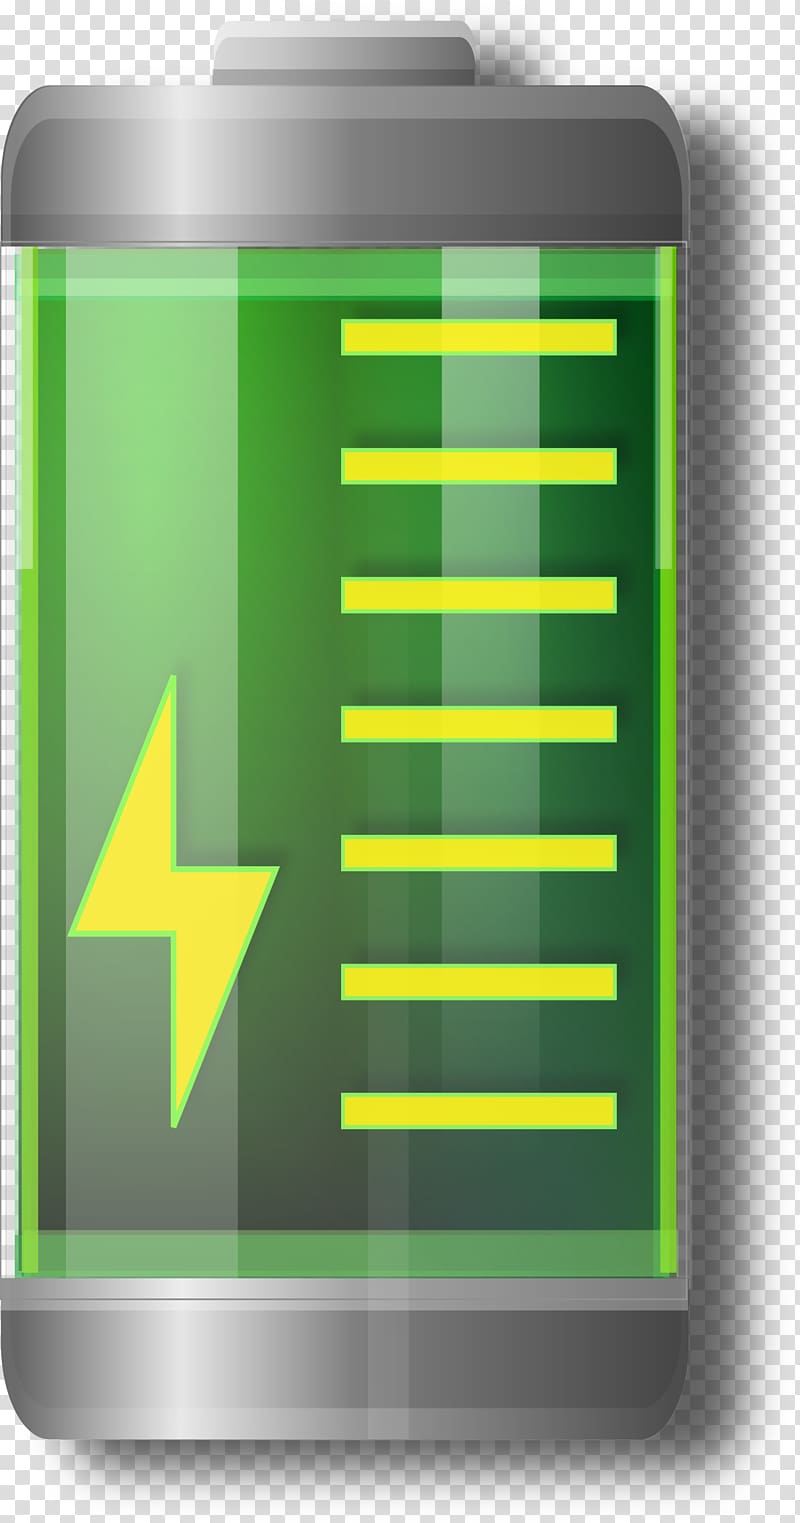 Battery charger Nexus 5X AAA battery Android, battery transparent background PNG clipart